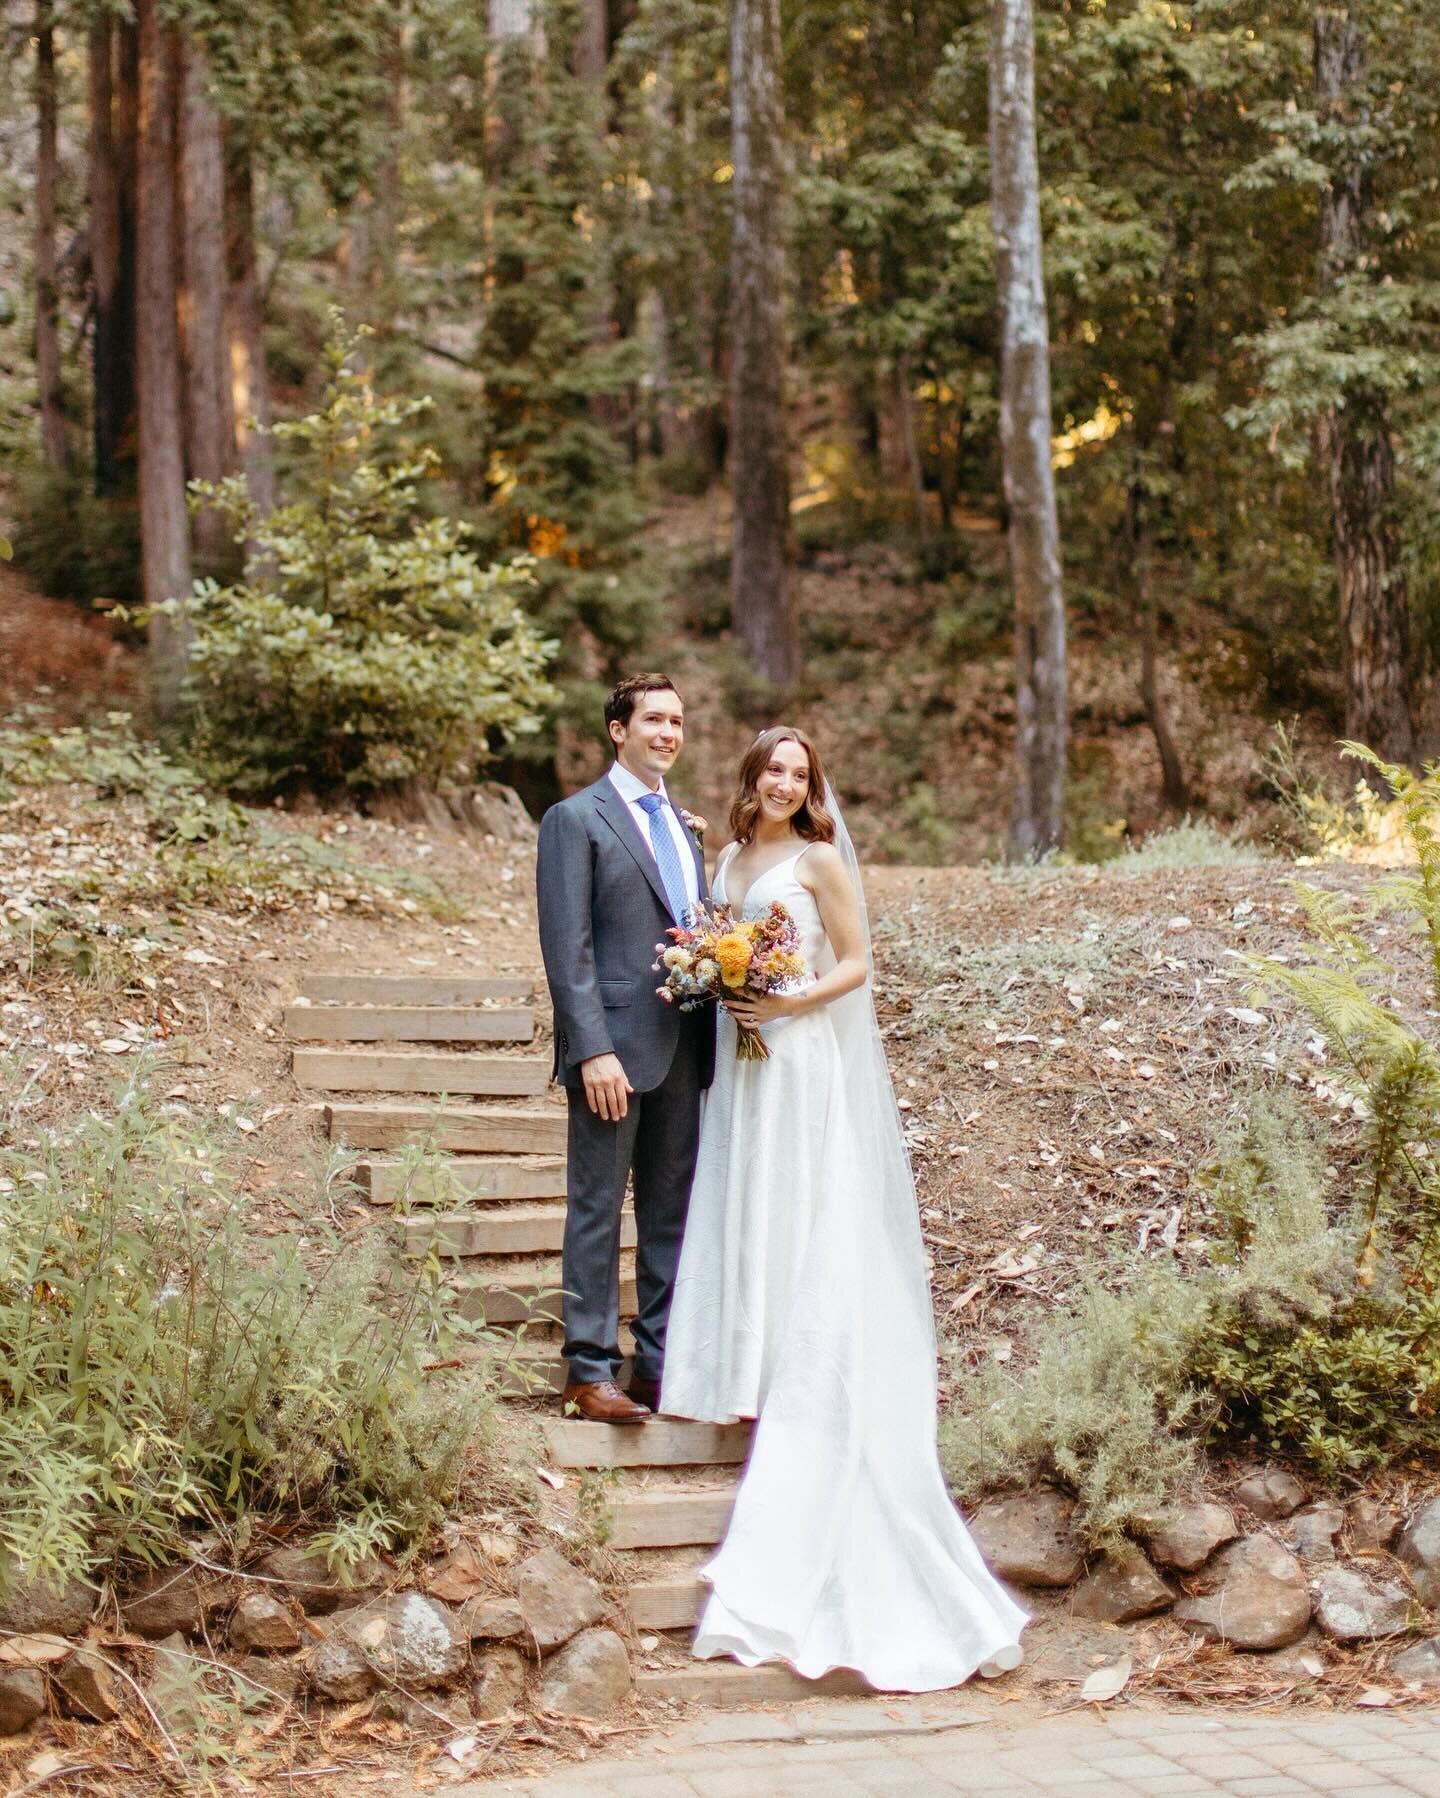 If love makes the world go &lsquo;round, people who love well are doing much of the life-giving spinning. Jess and Ted are so lovely and loving, they seem to be doing just that. Link in bio to see why their majestic redwoods wedding truly was an exce